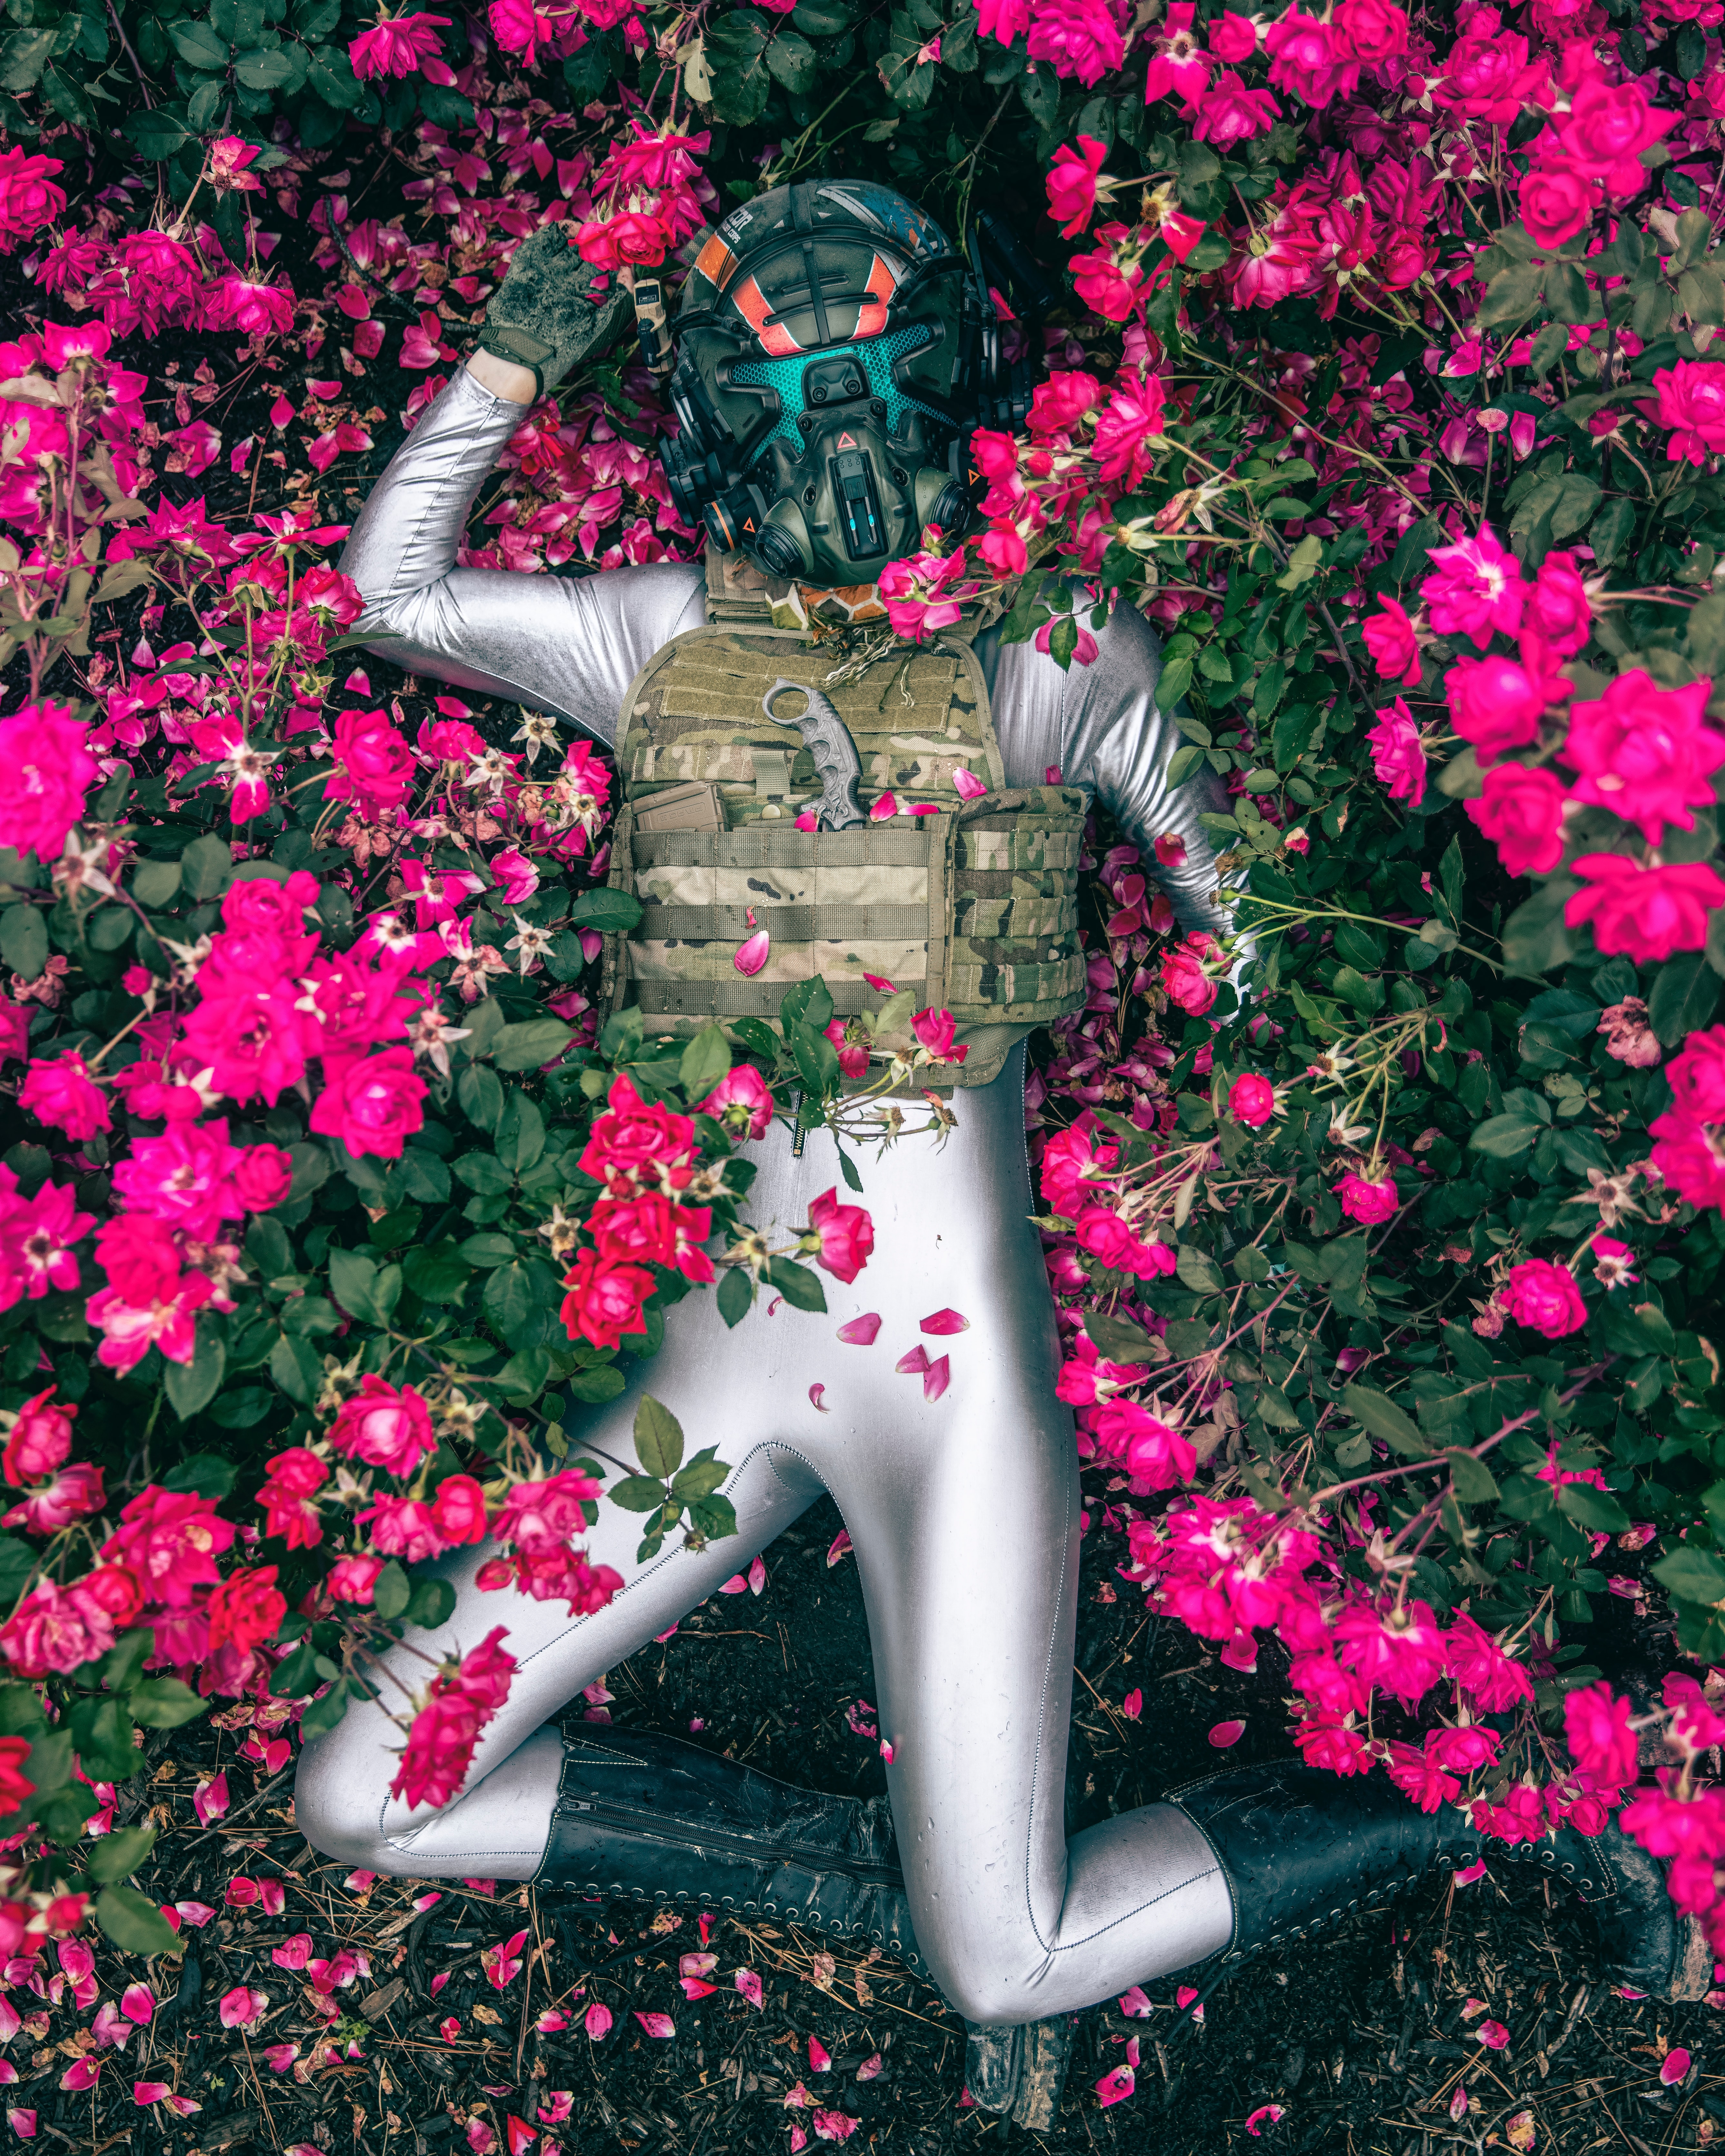 HD wallpaper, Extinction, Mask, Suit, 5K, Aerial View, Floral, Armor, Pink Flowers, Lying Down